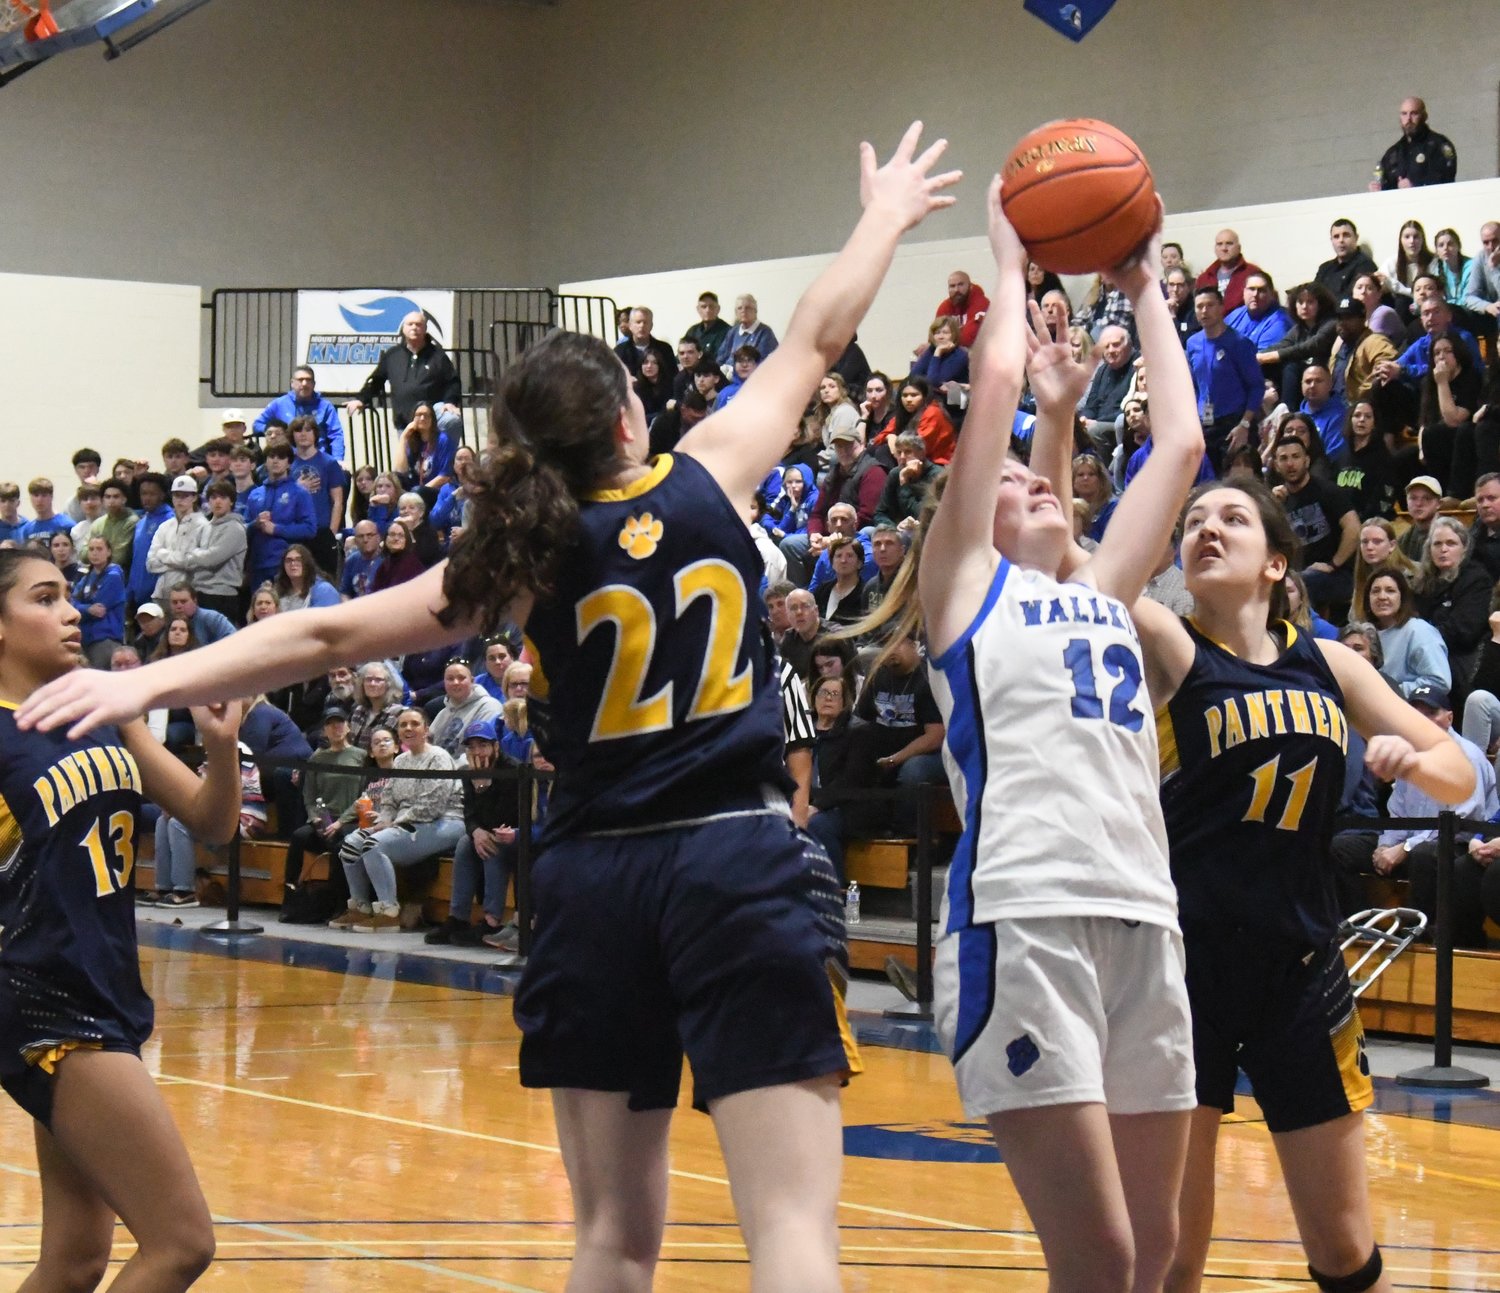 Wallkill's Alex Dembinsky grabs a rebound in front of Walter Panas' Julia Gallinger (22) and Sara Chiulli (11) as Sophia Tavarez (13) looks on during Saturday's NYSPHSAA Class A regional final at Mount Saint Mary College in Newburgh.